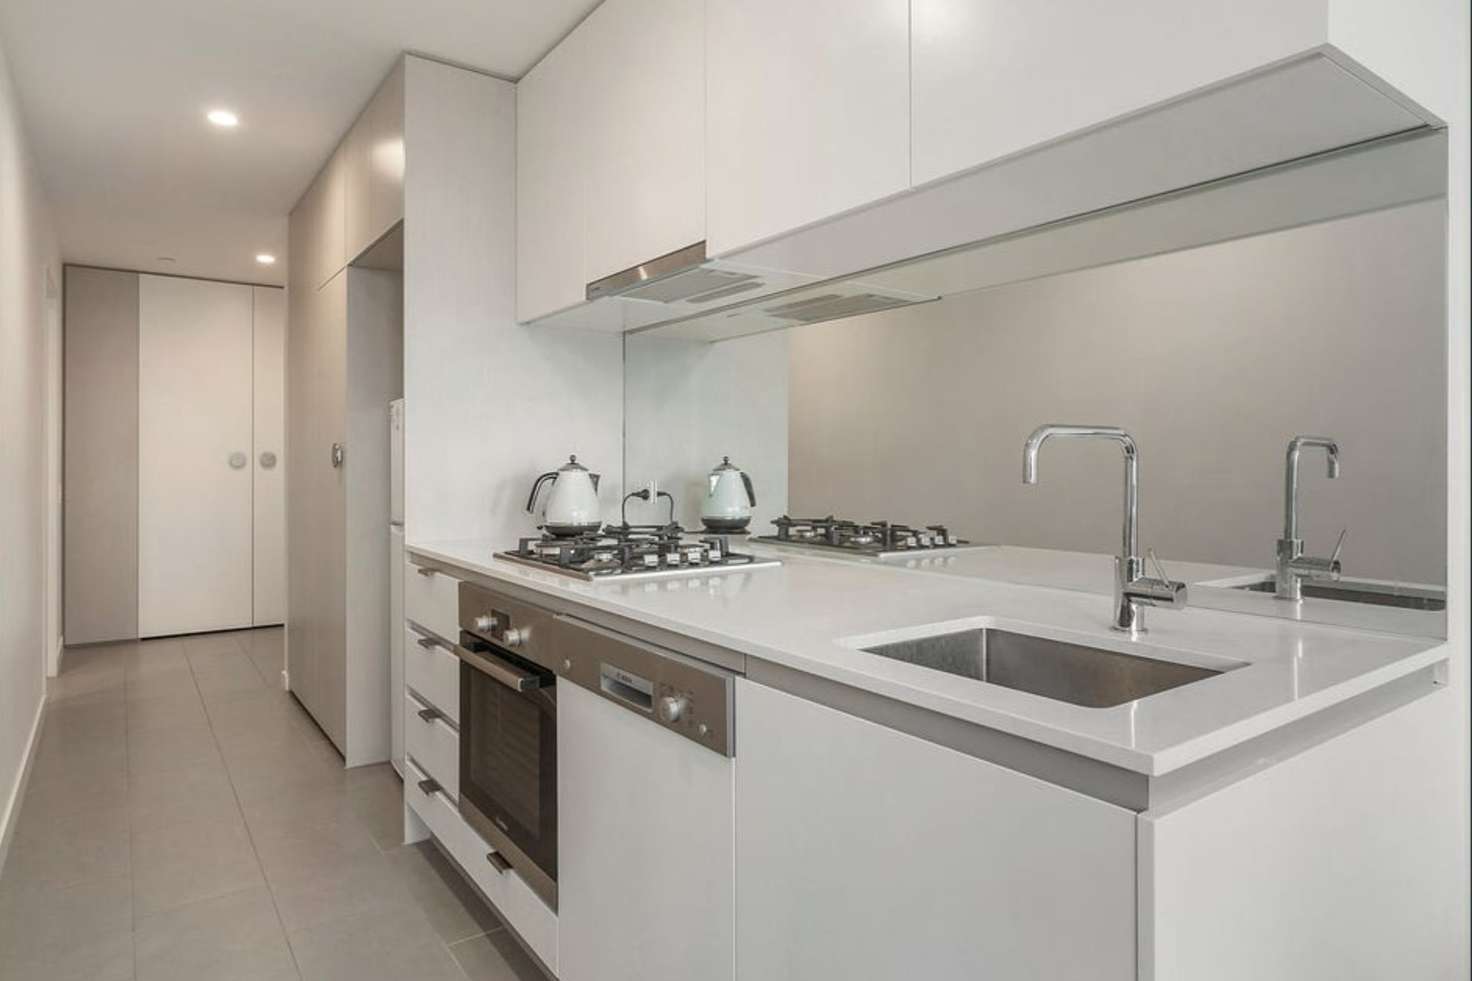 Main view of Homely apartment listing, 905/710 Station Street, Box Hill VIC 3128